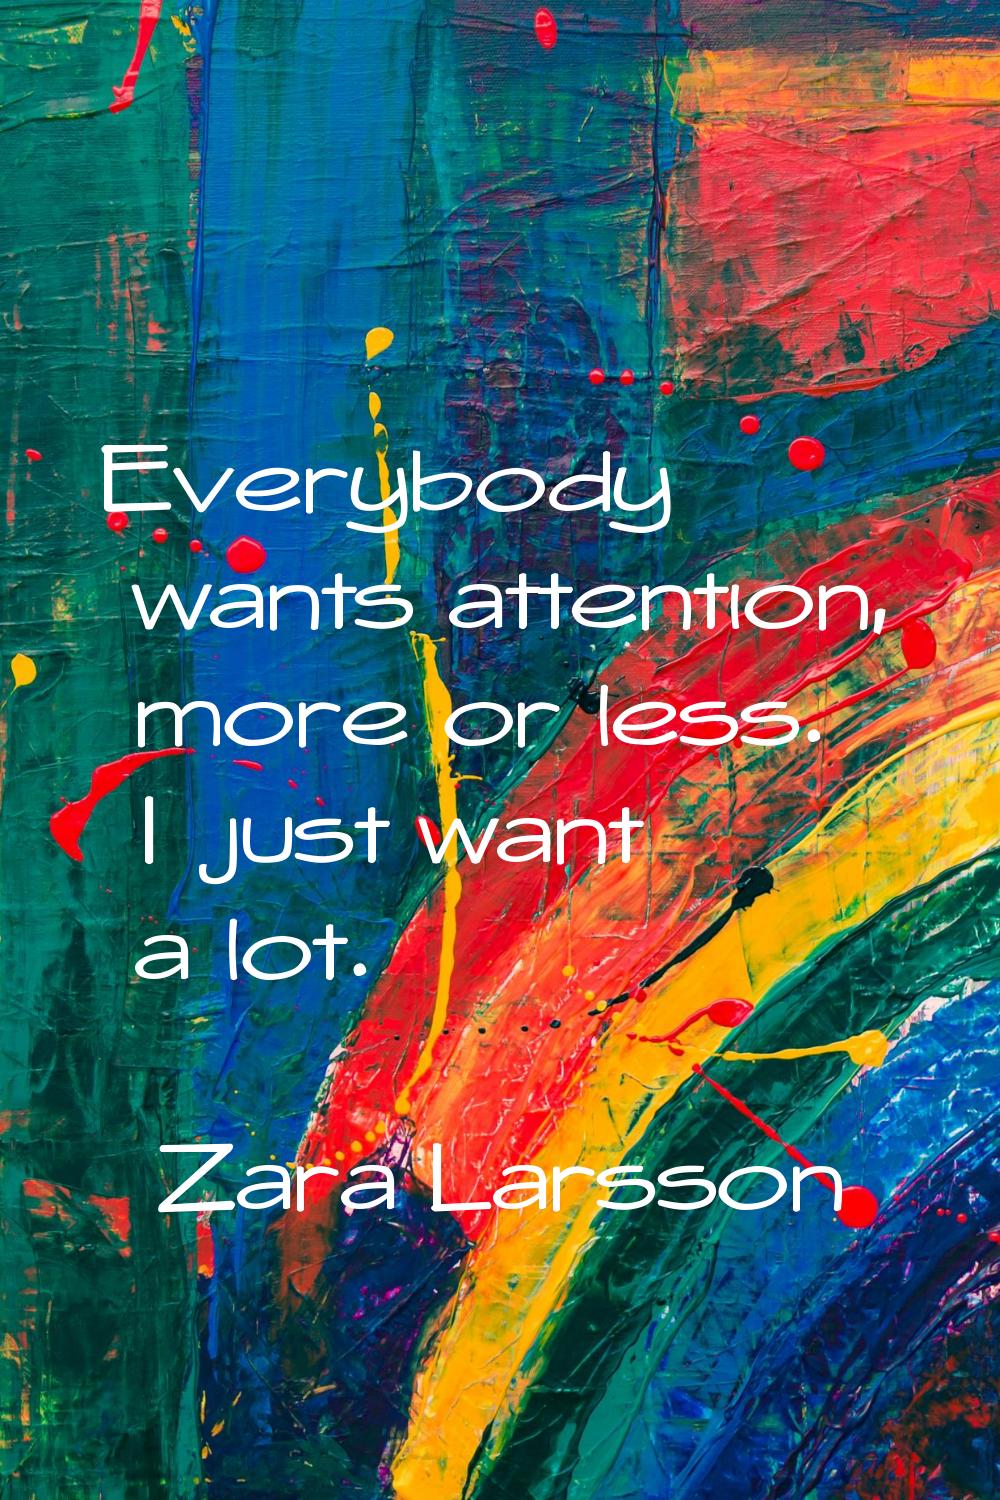 Everybody wants attention, more or less. I just want a lot.